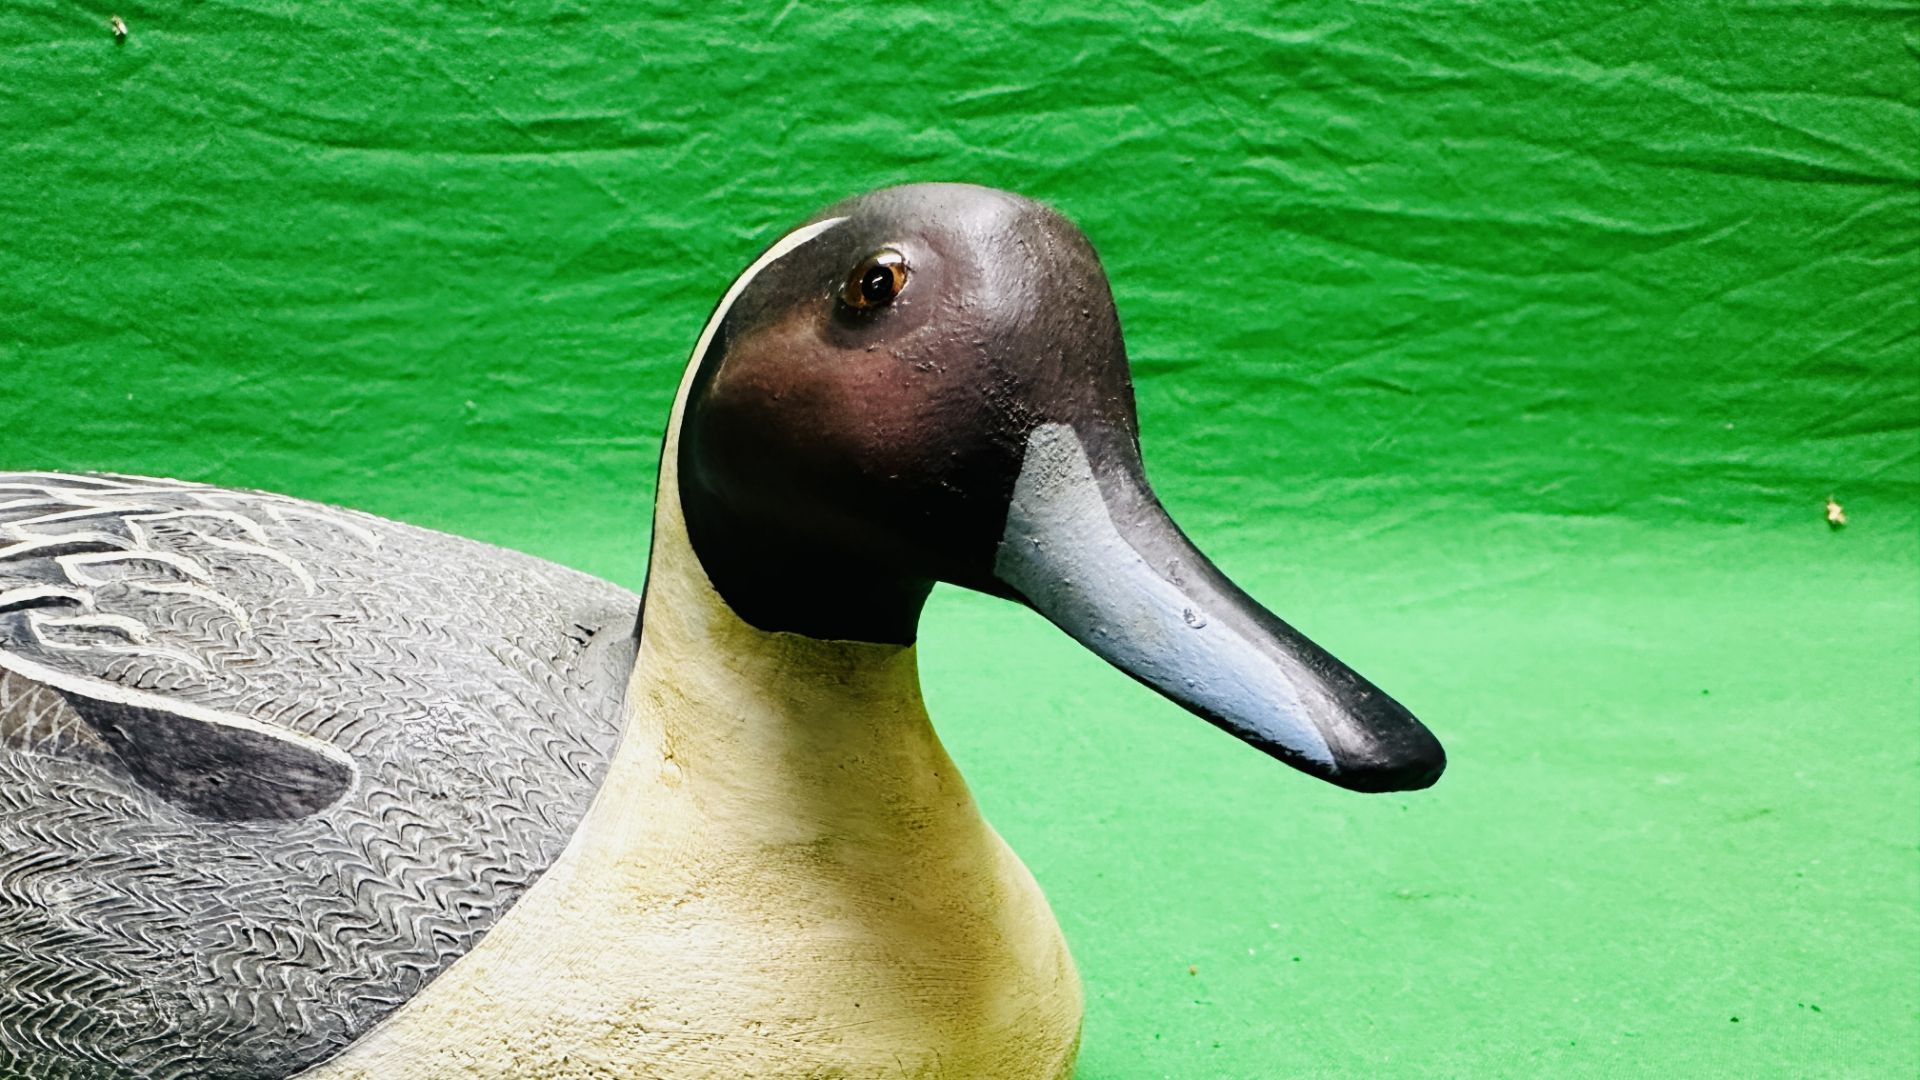 A HANDCRAFTED DUCK DECOY HAVING HANDPAINTED DETAIL AND GLASS EYES. - Image 2 of 10